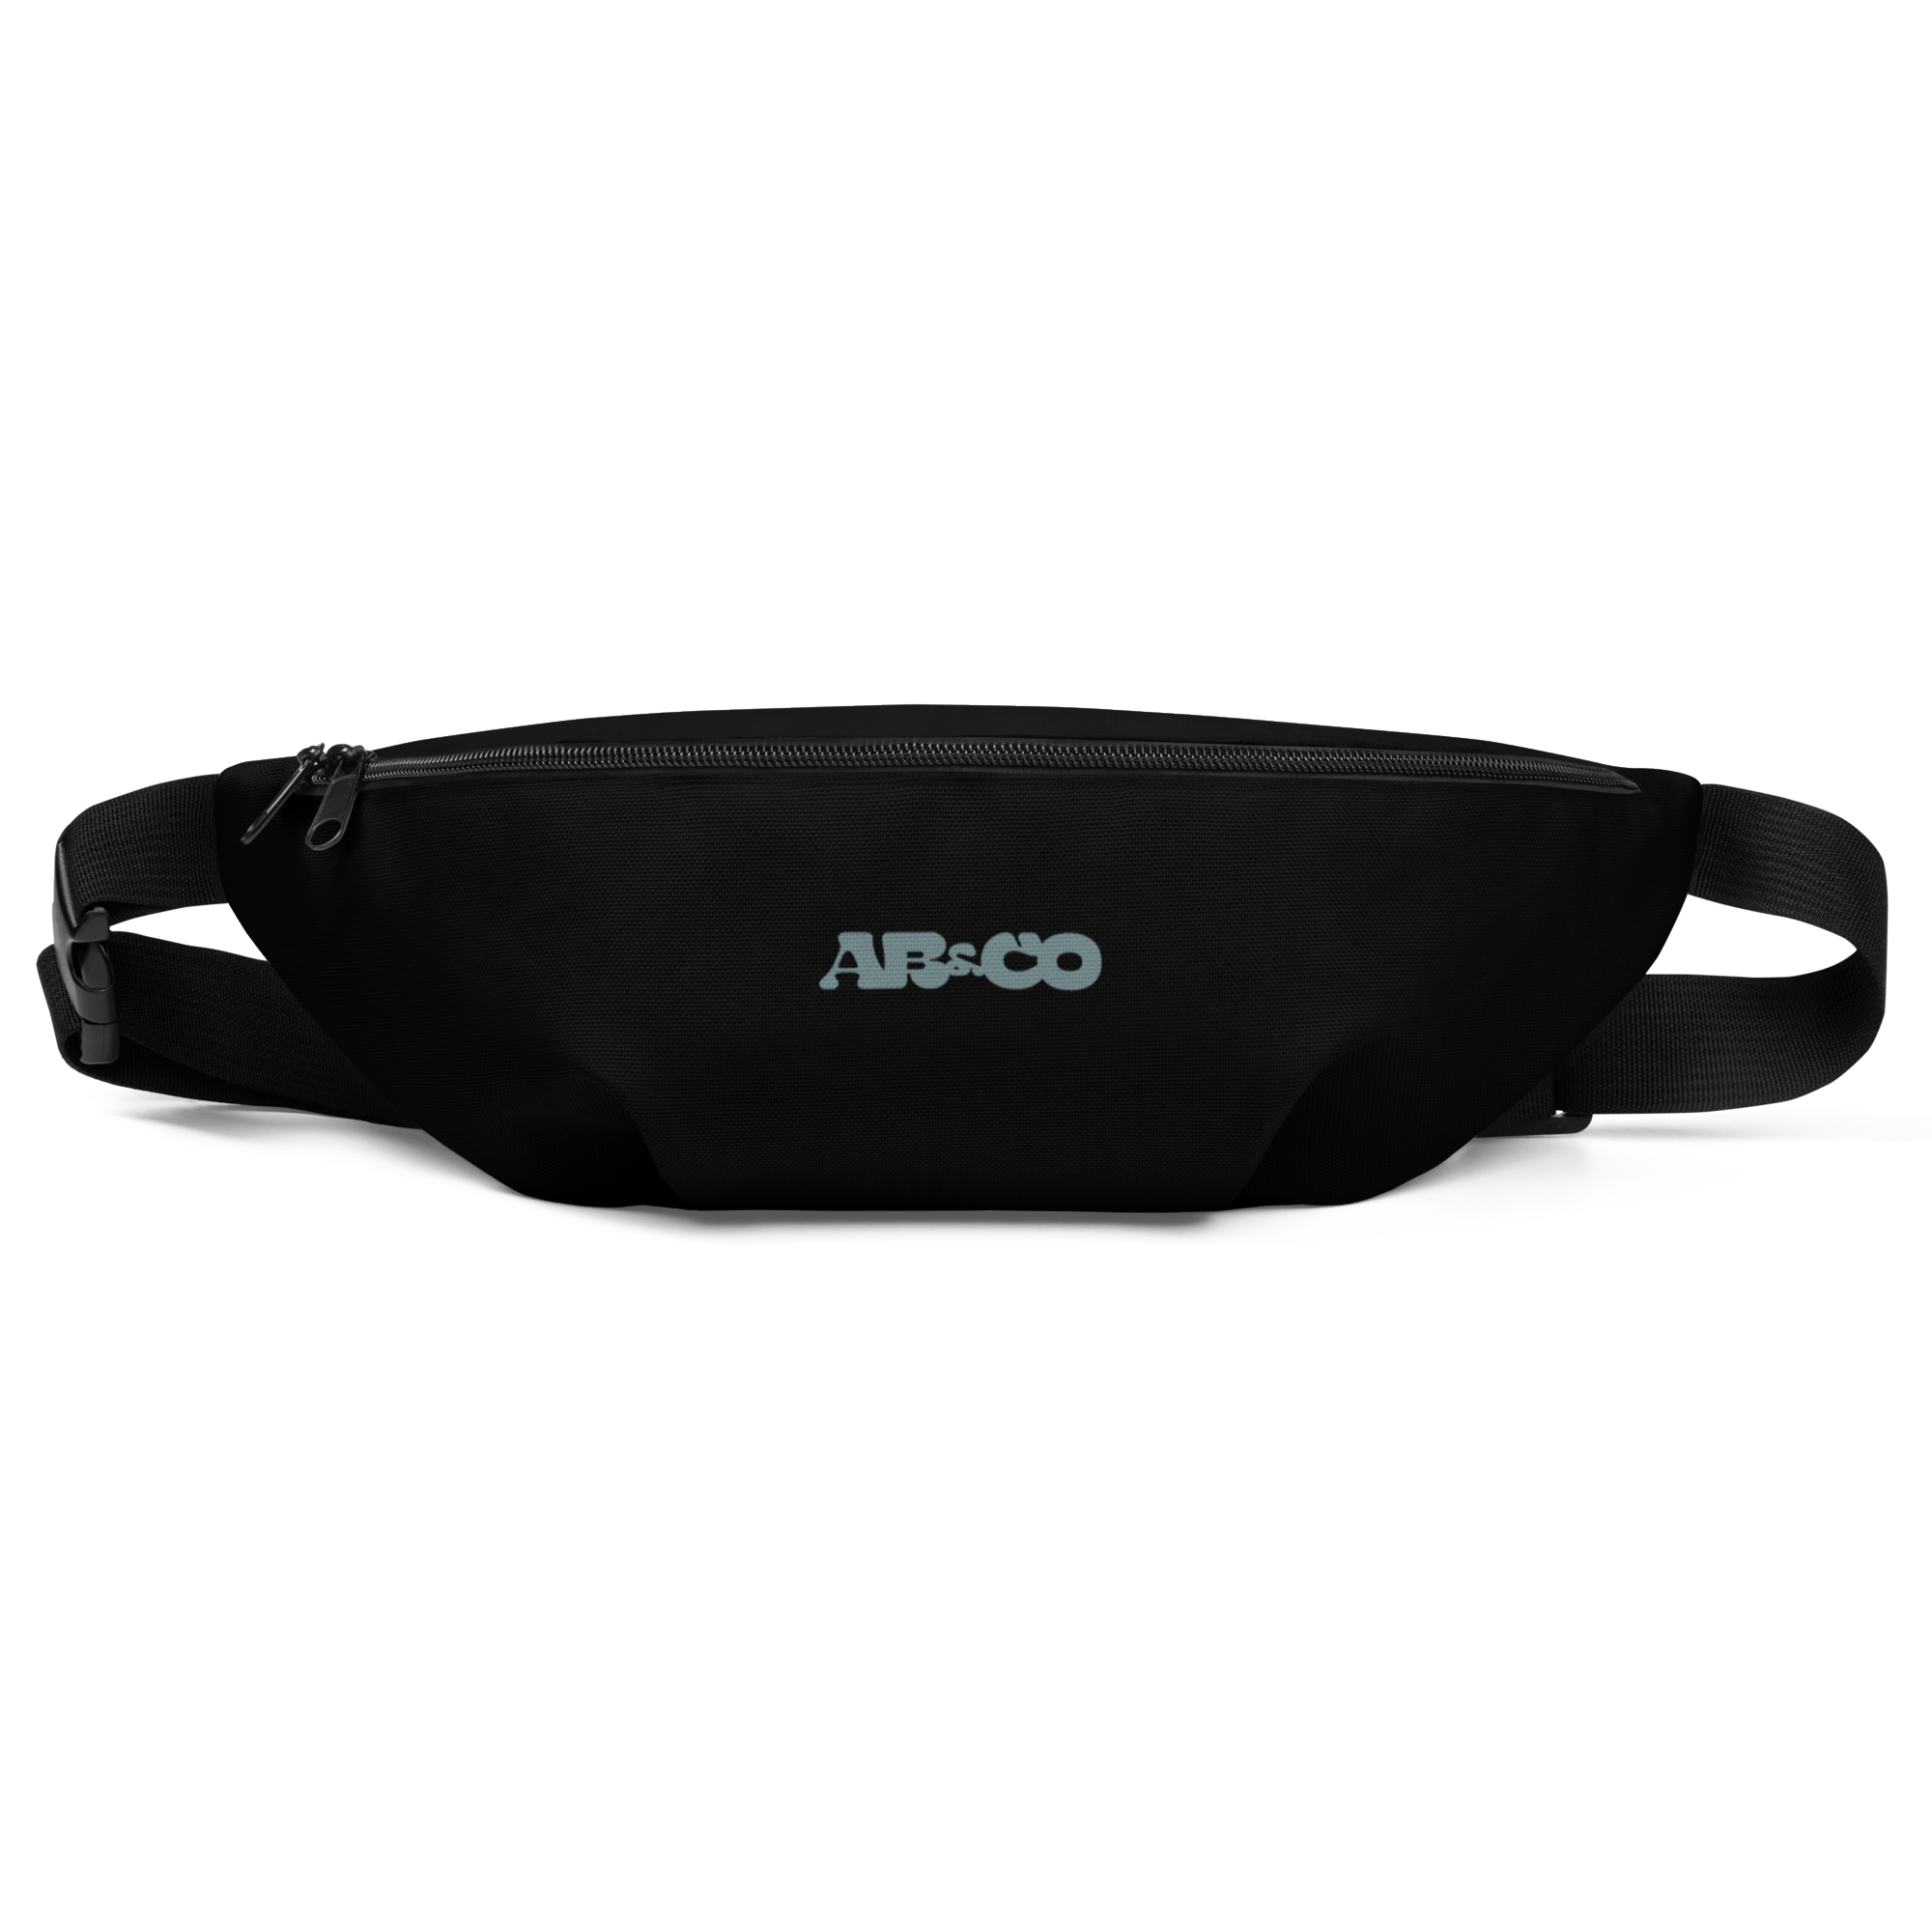 AB&CO Fanny Pack